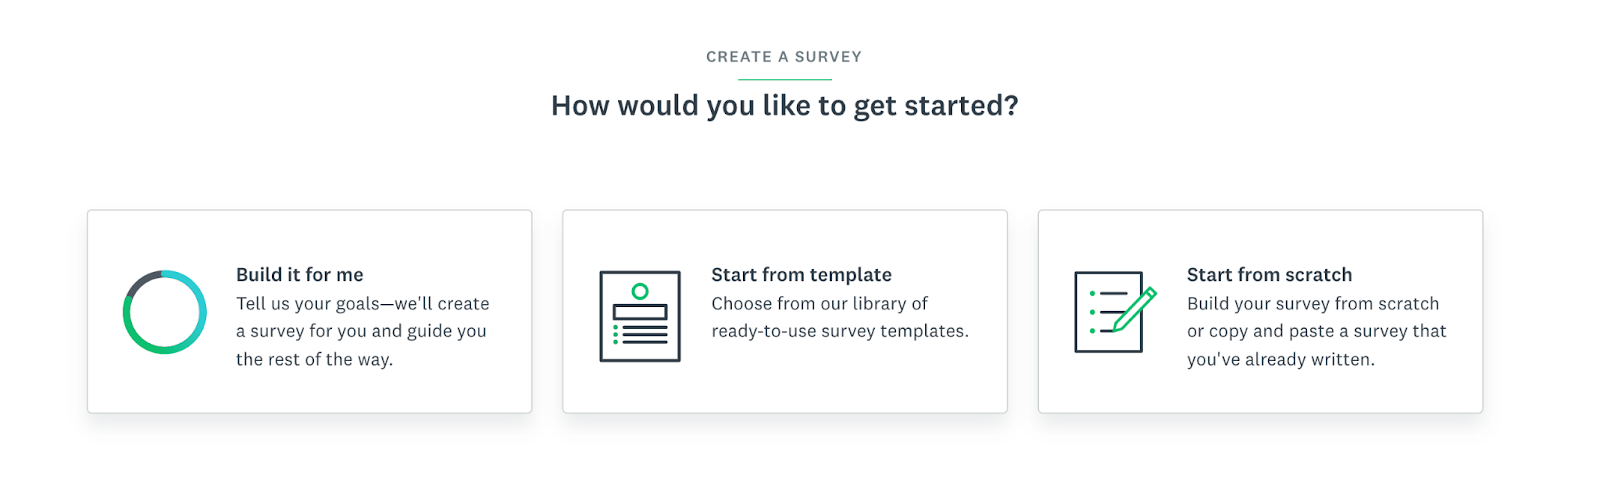 How to create a survey using survey monkey:  select the survey you want to create